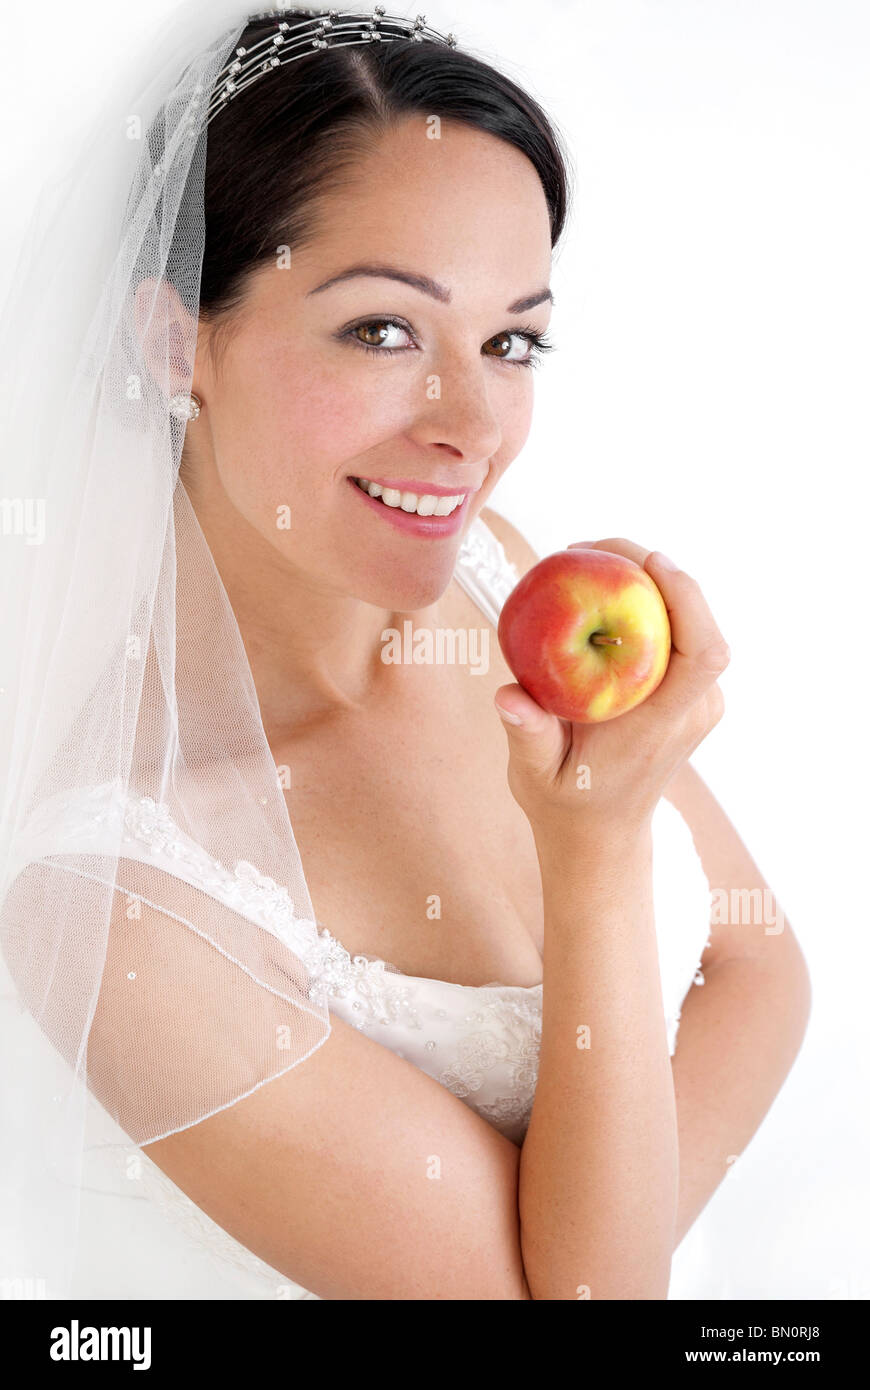 Healthy diet for the big day Stock Photo